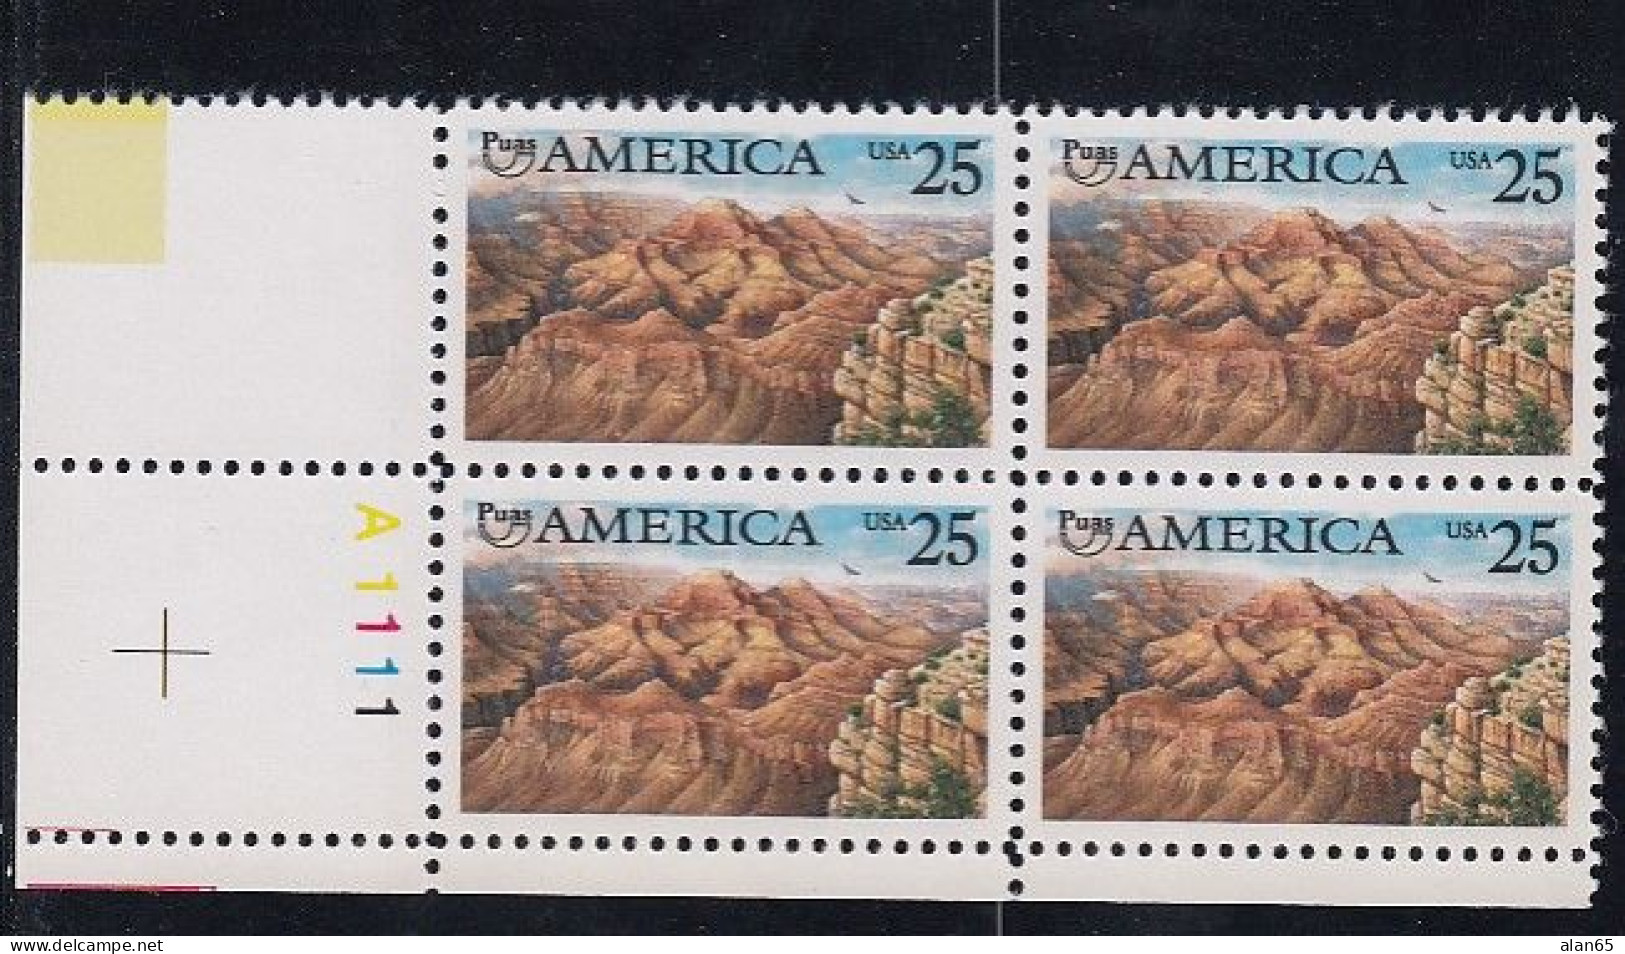 Sc#2512, Pre-Columbian America, Grand Canyon, 25-cent 1990 Issue, Plate # Block Of 4 MNH US Postage Stamps - Plate Blocks & Sheetlets